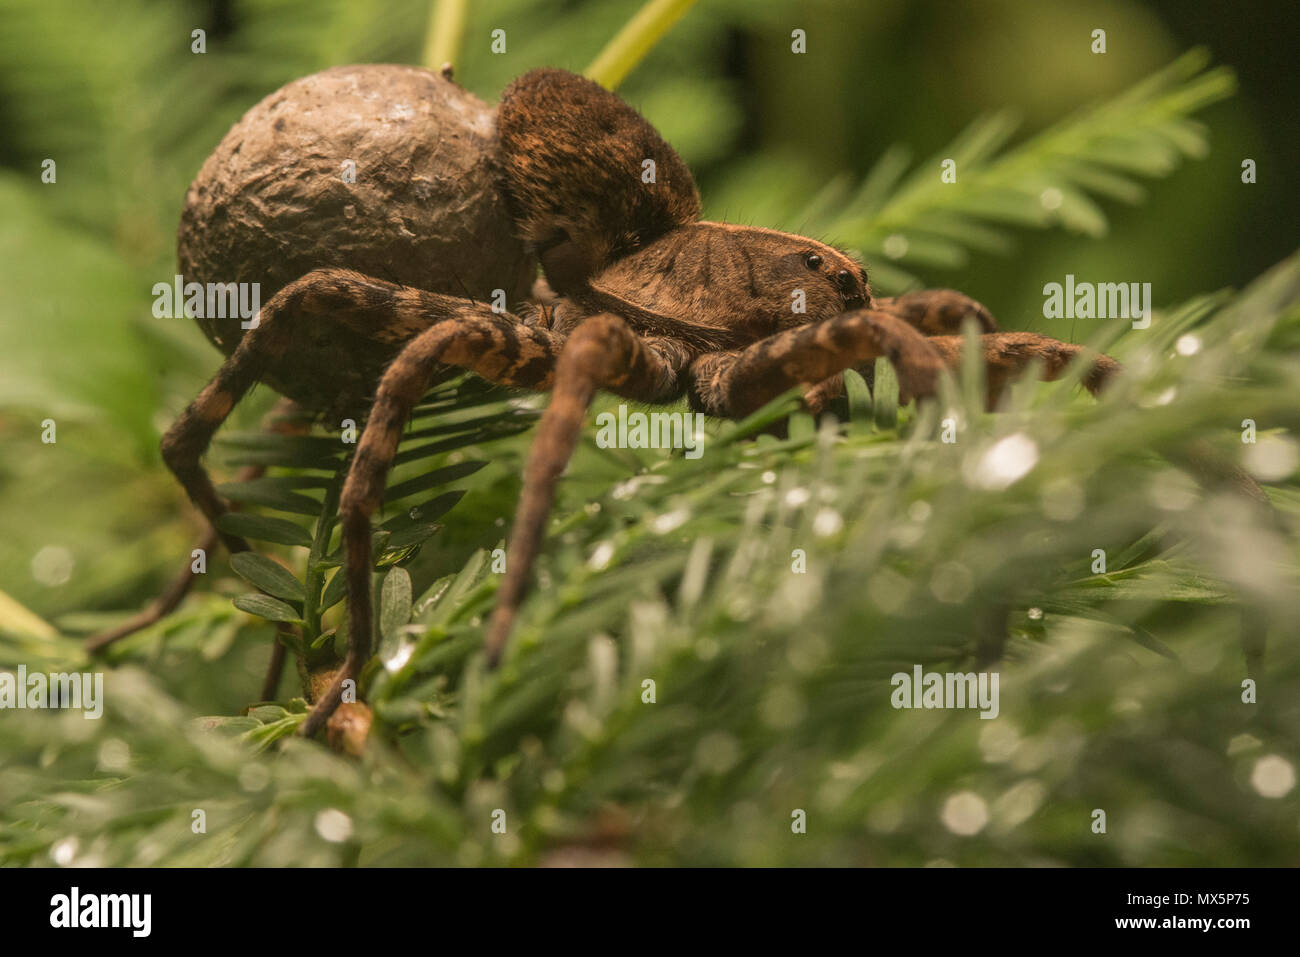 Female Carolina wolf spider (Hogna carolinensis) carrying her egg sac on her back. The largest wolf spider in N America and the state spider of SC. Stock Photo